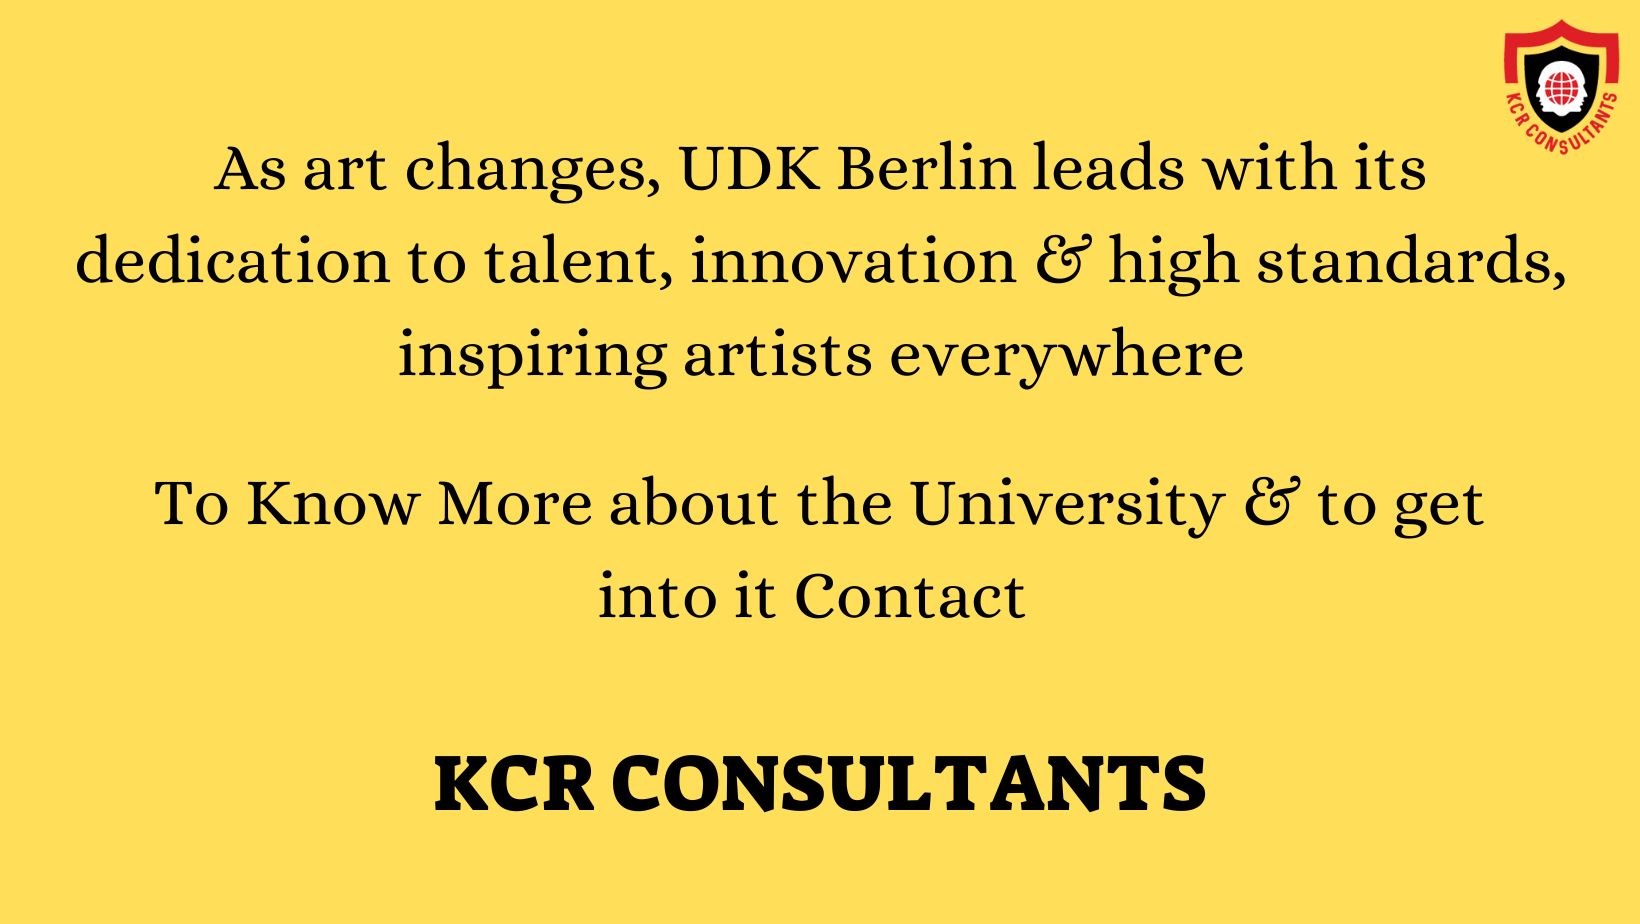 BERLIN UNIVERSITY OF THE ARTS (UDK) - KCR CONSULTANTS Contact us